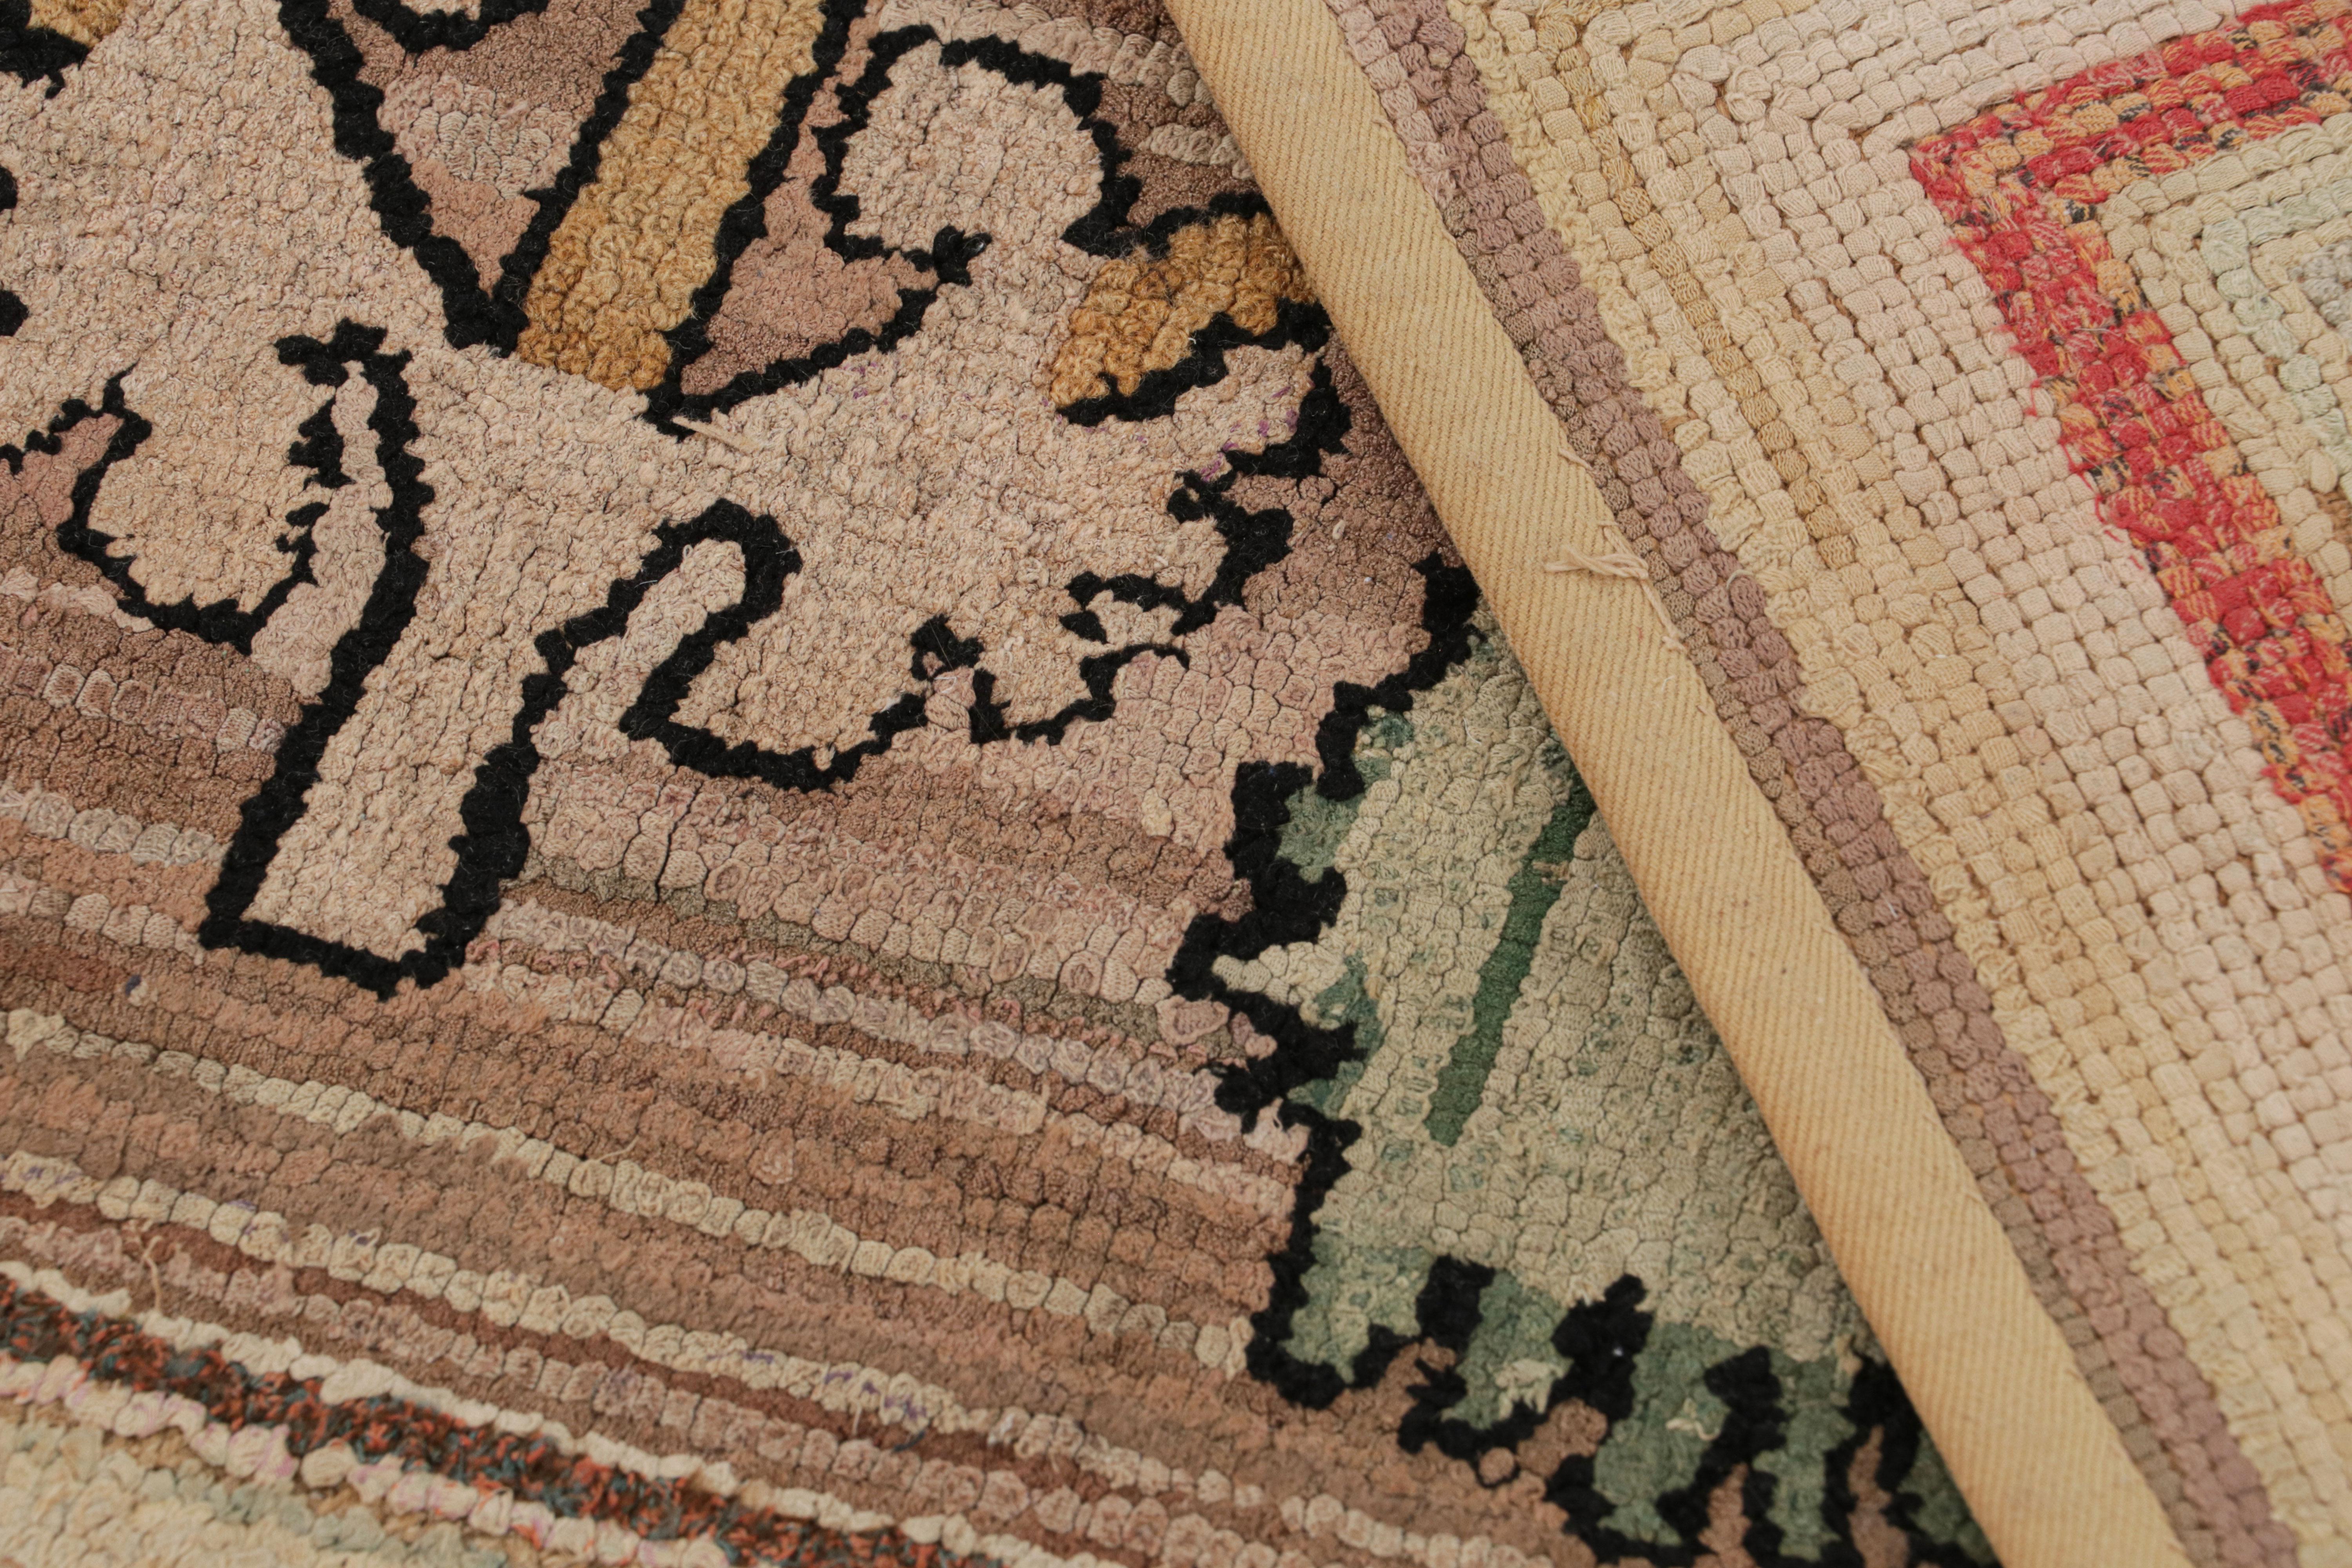 Early 20th Century Antique Hooked Runner Rug in Beige with Green Bird Pictorials, from Rug & Kilim